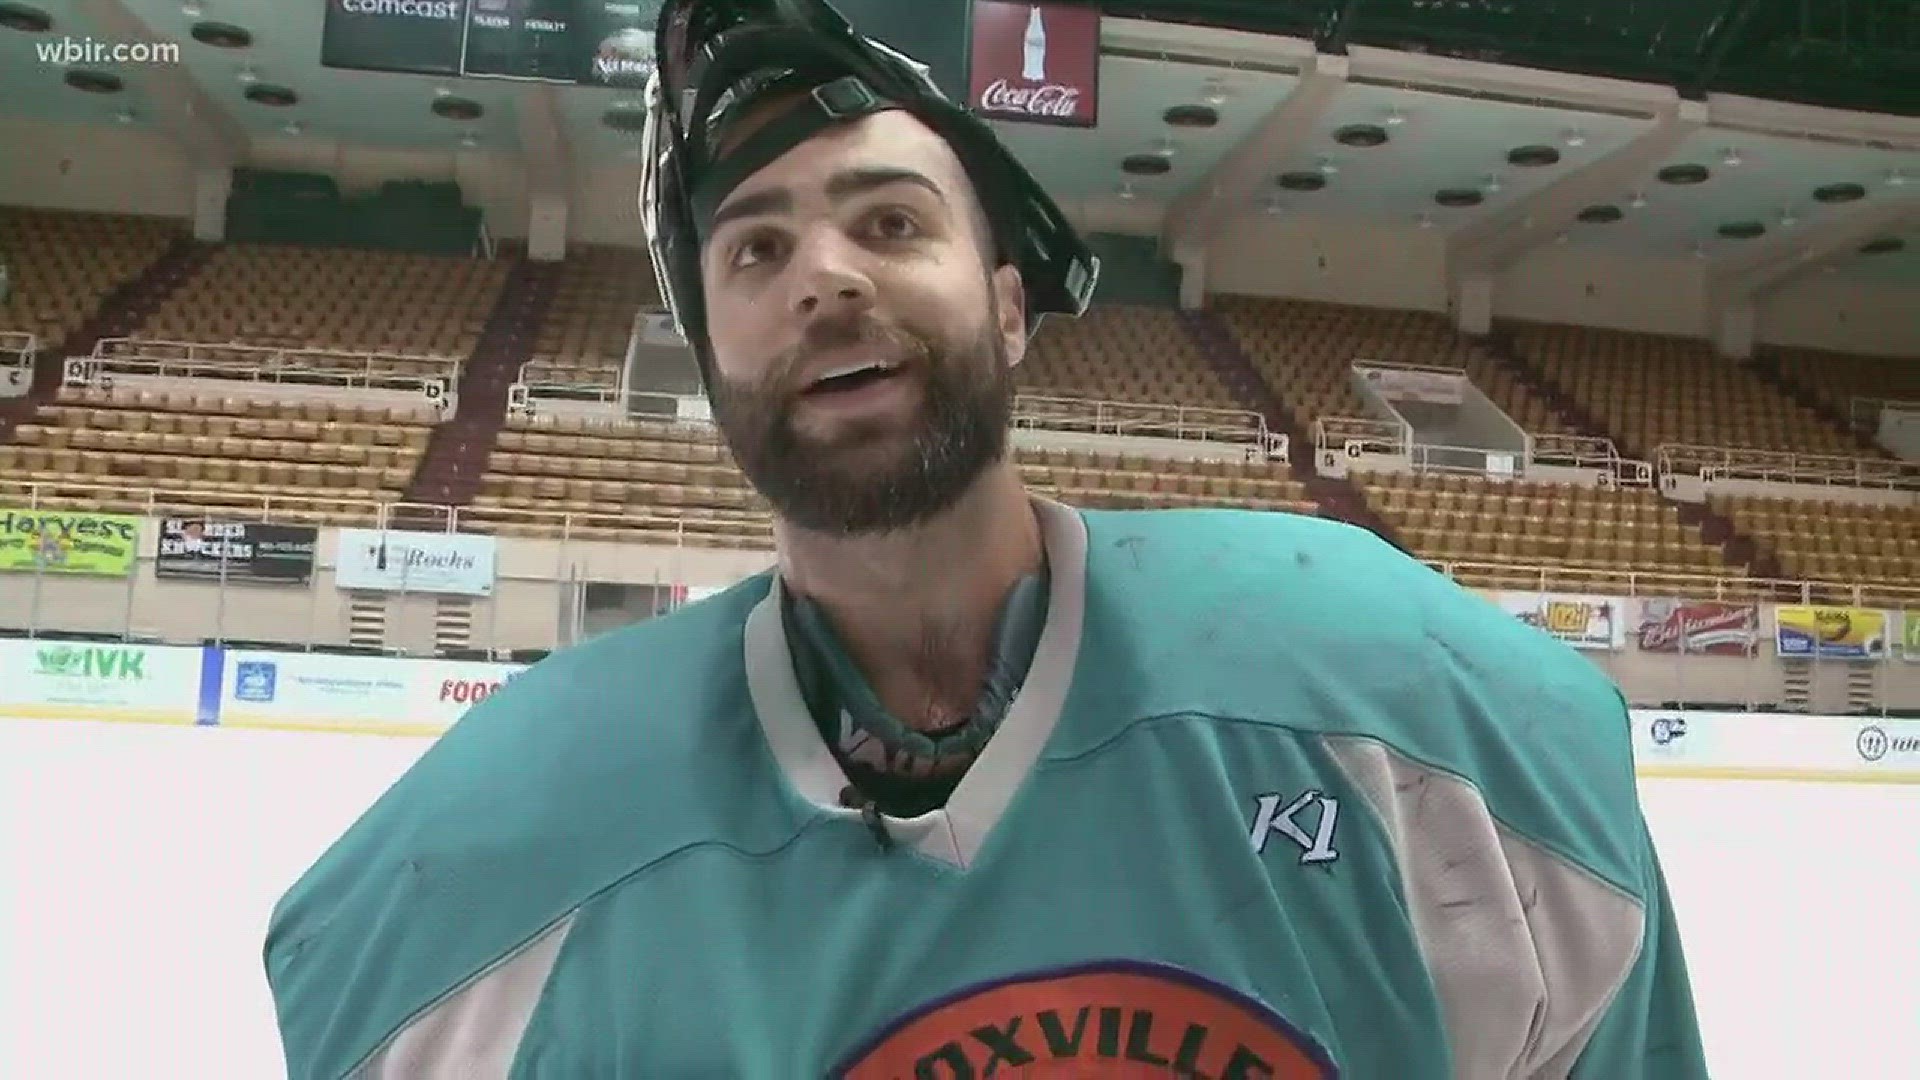 Chris Izmirlian and Pat Spano have been friends for eight years, and are excited to take on the SPHL season together.